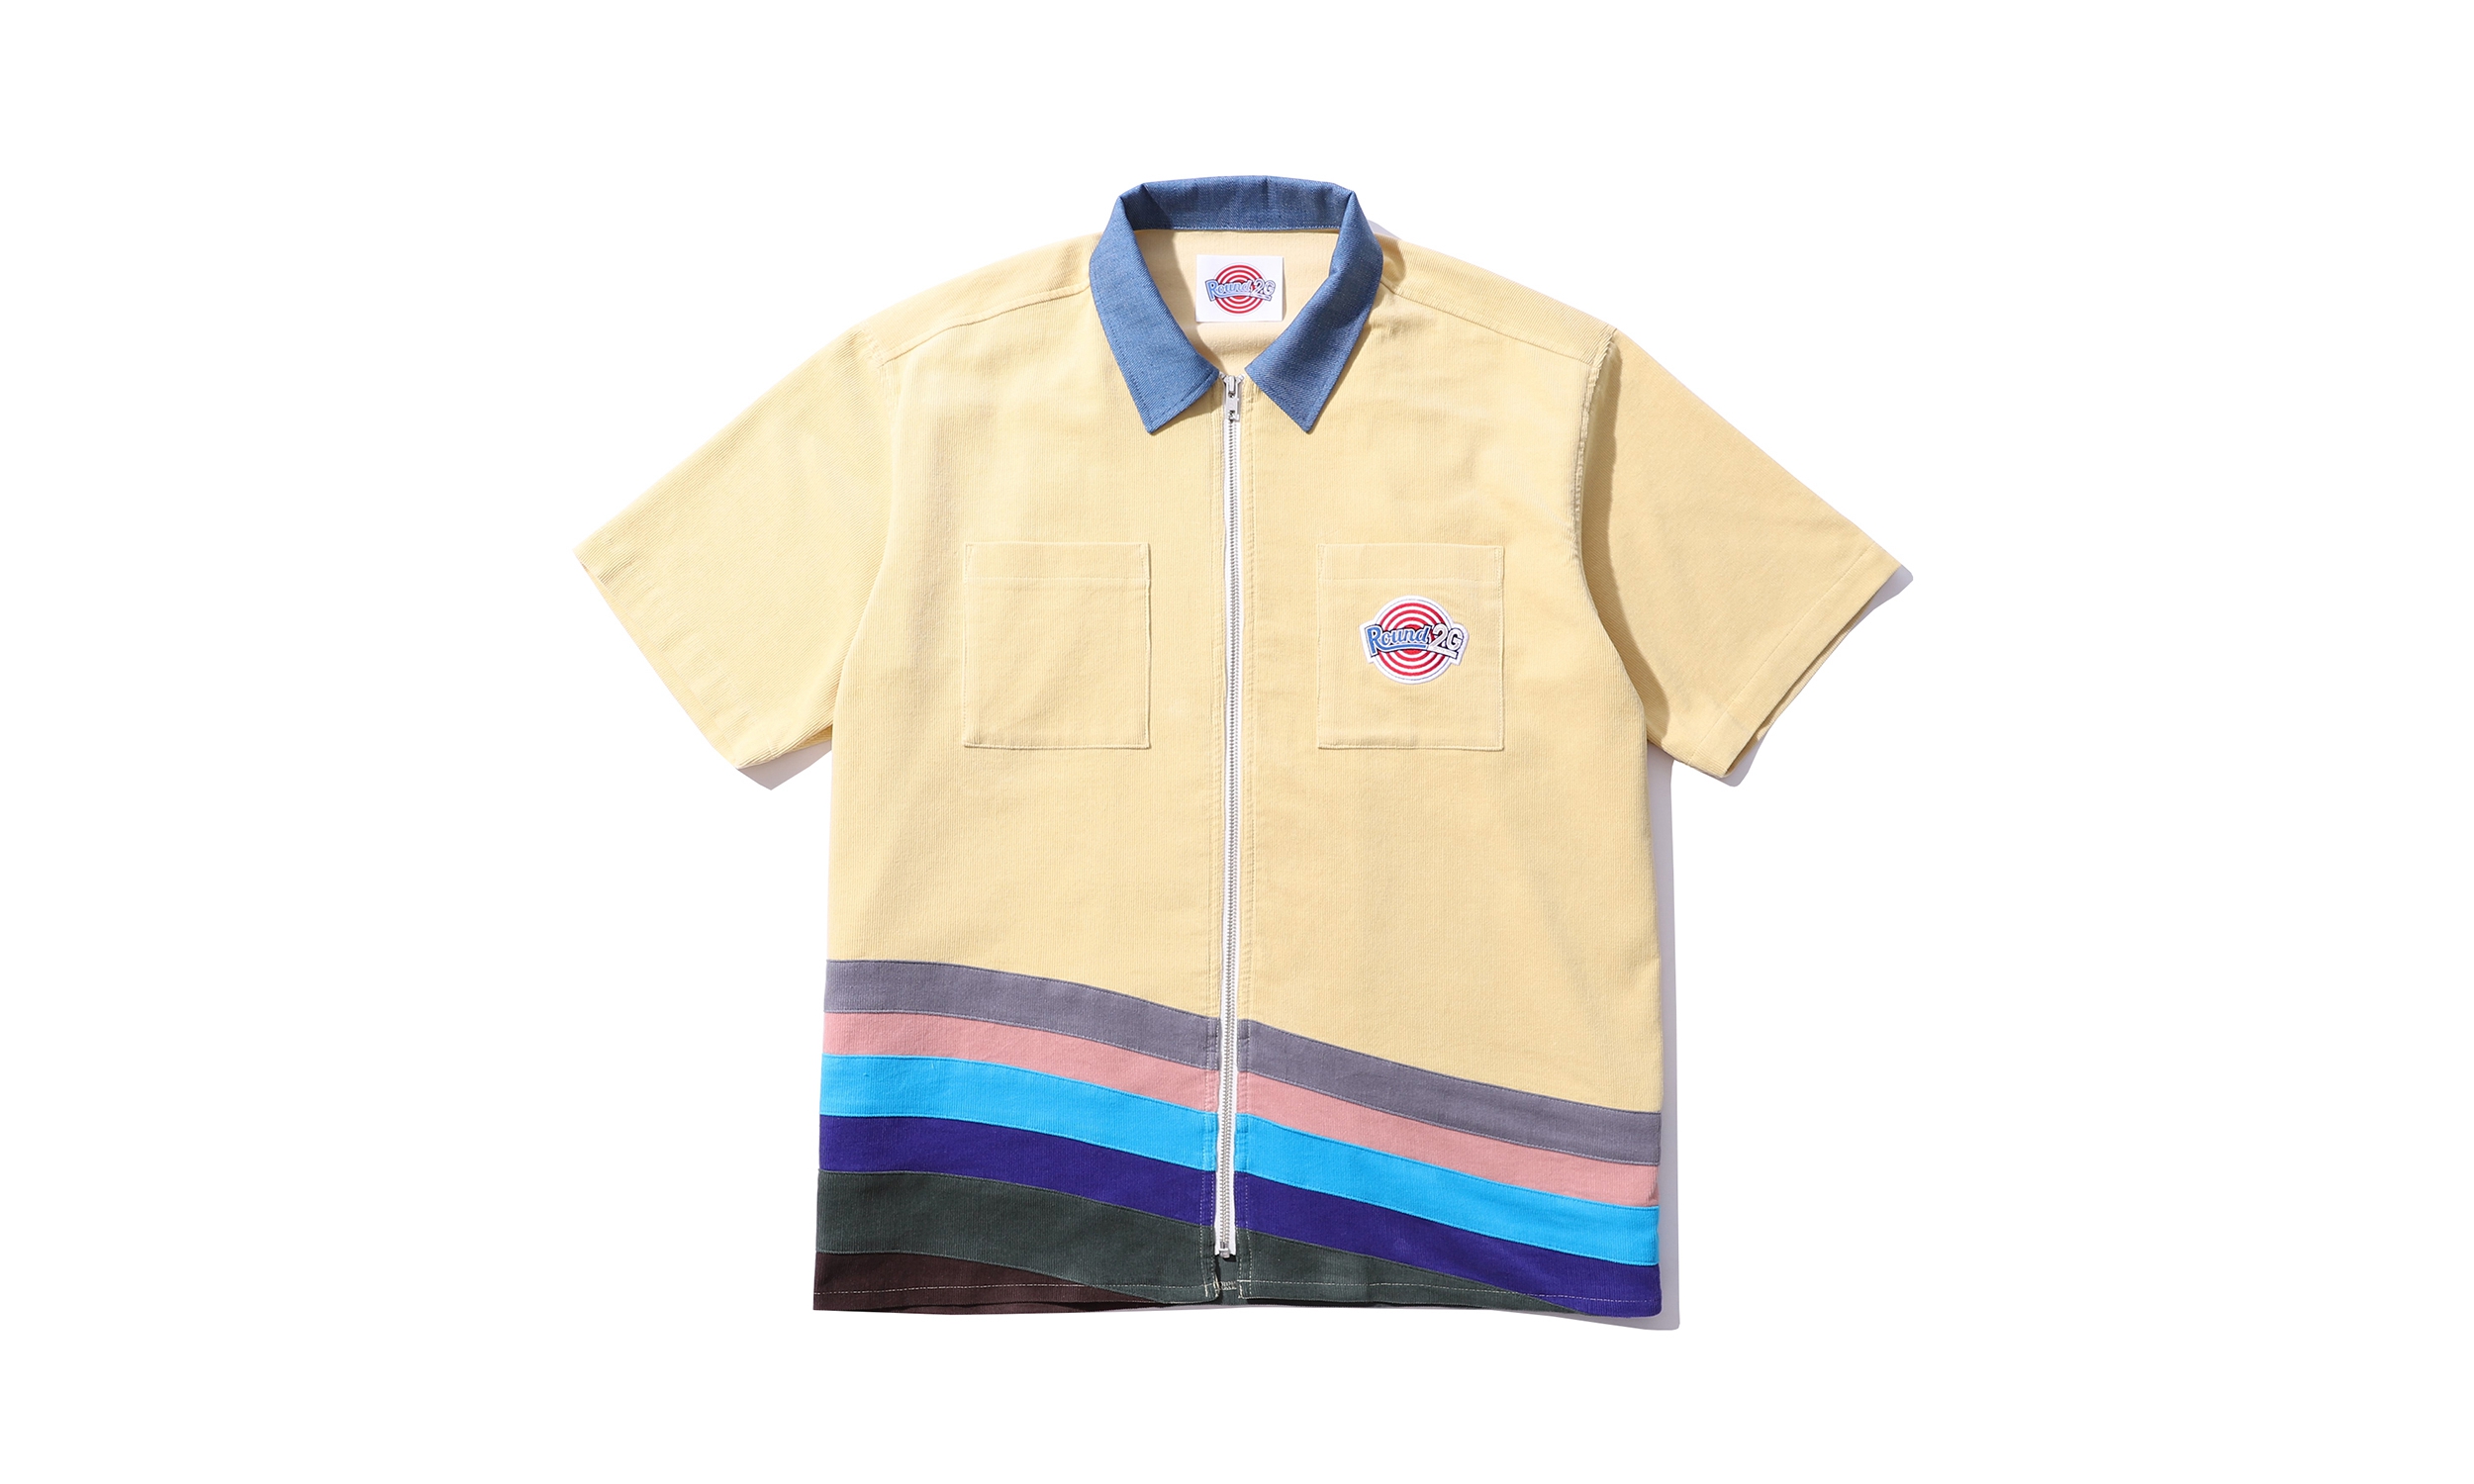 Sean Wotherspoon 携手 2G Tokyo 推出全新合作